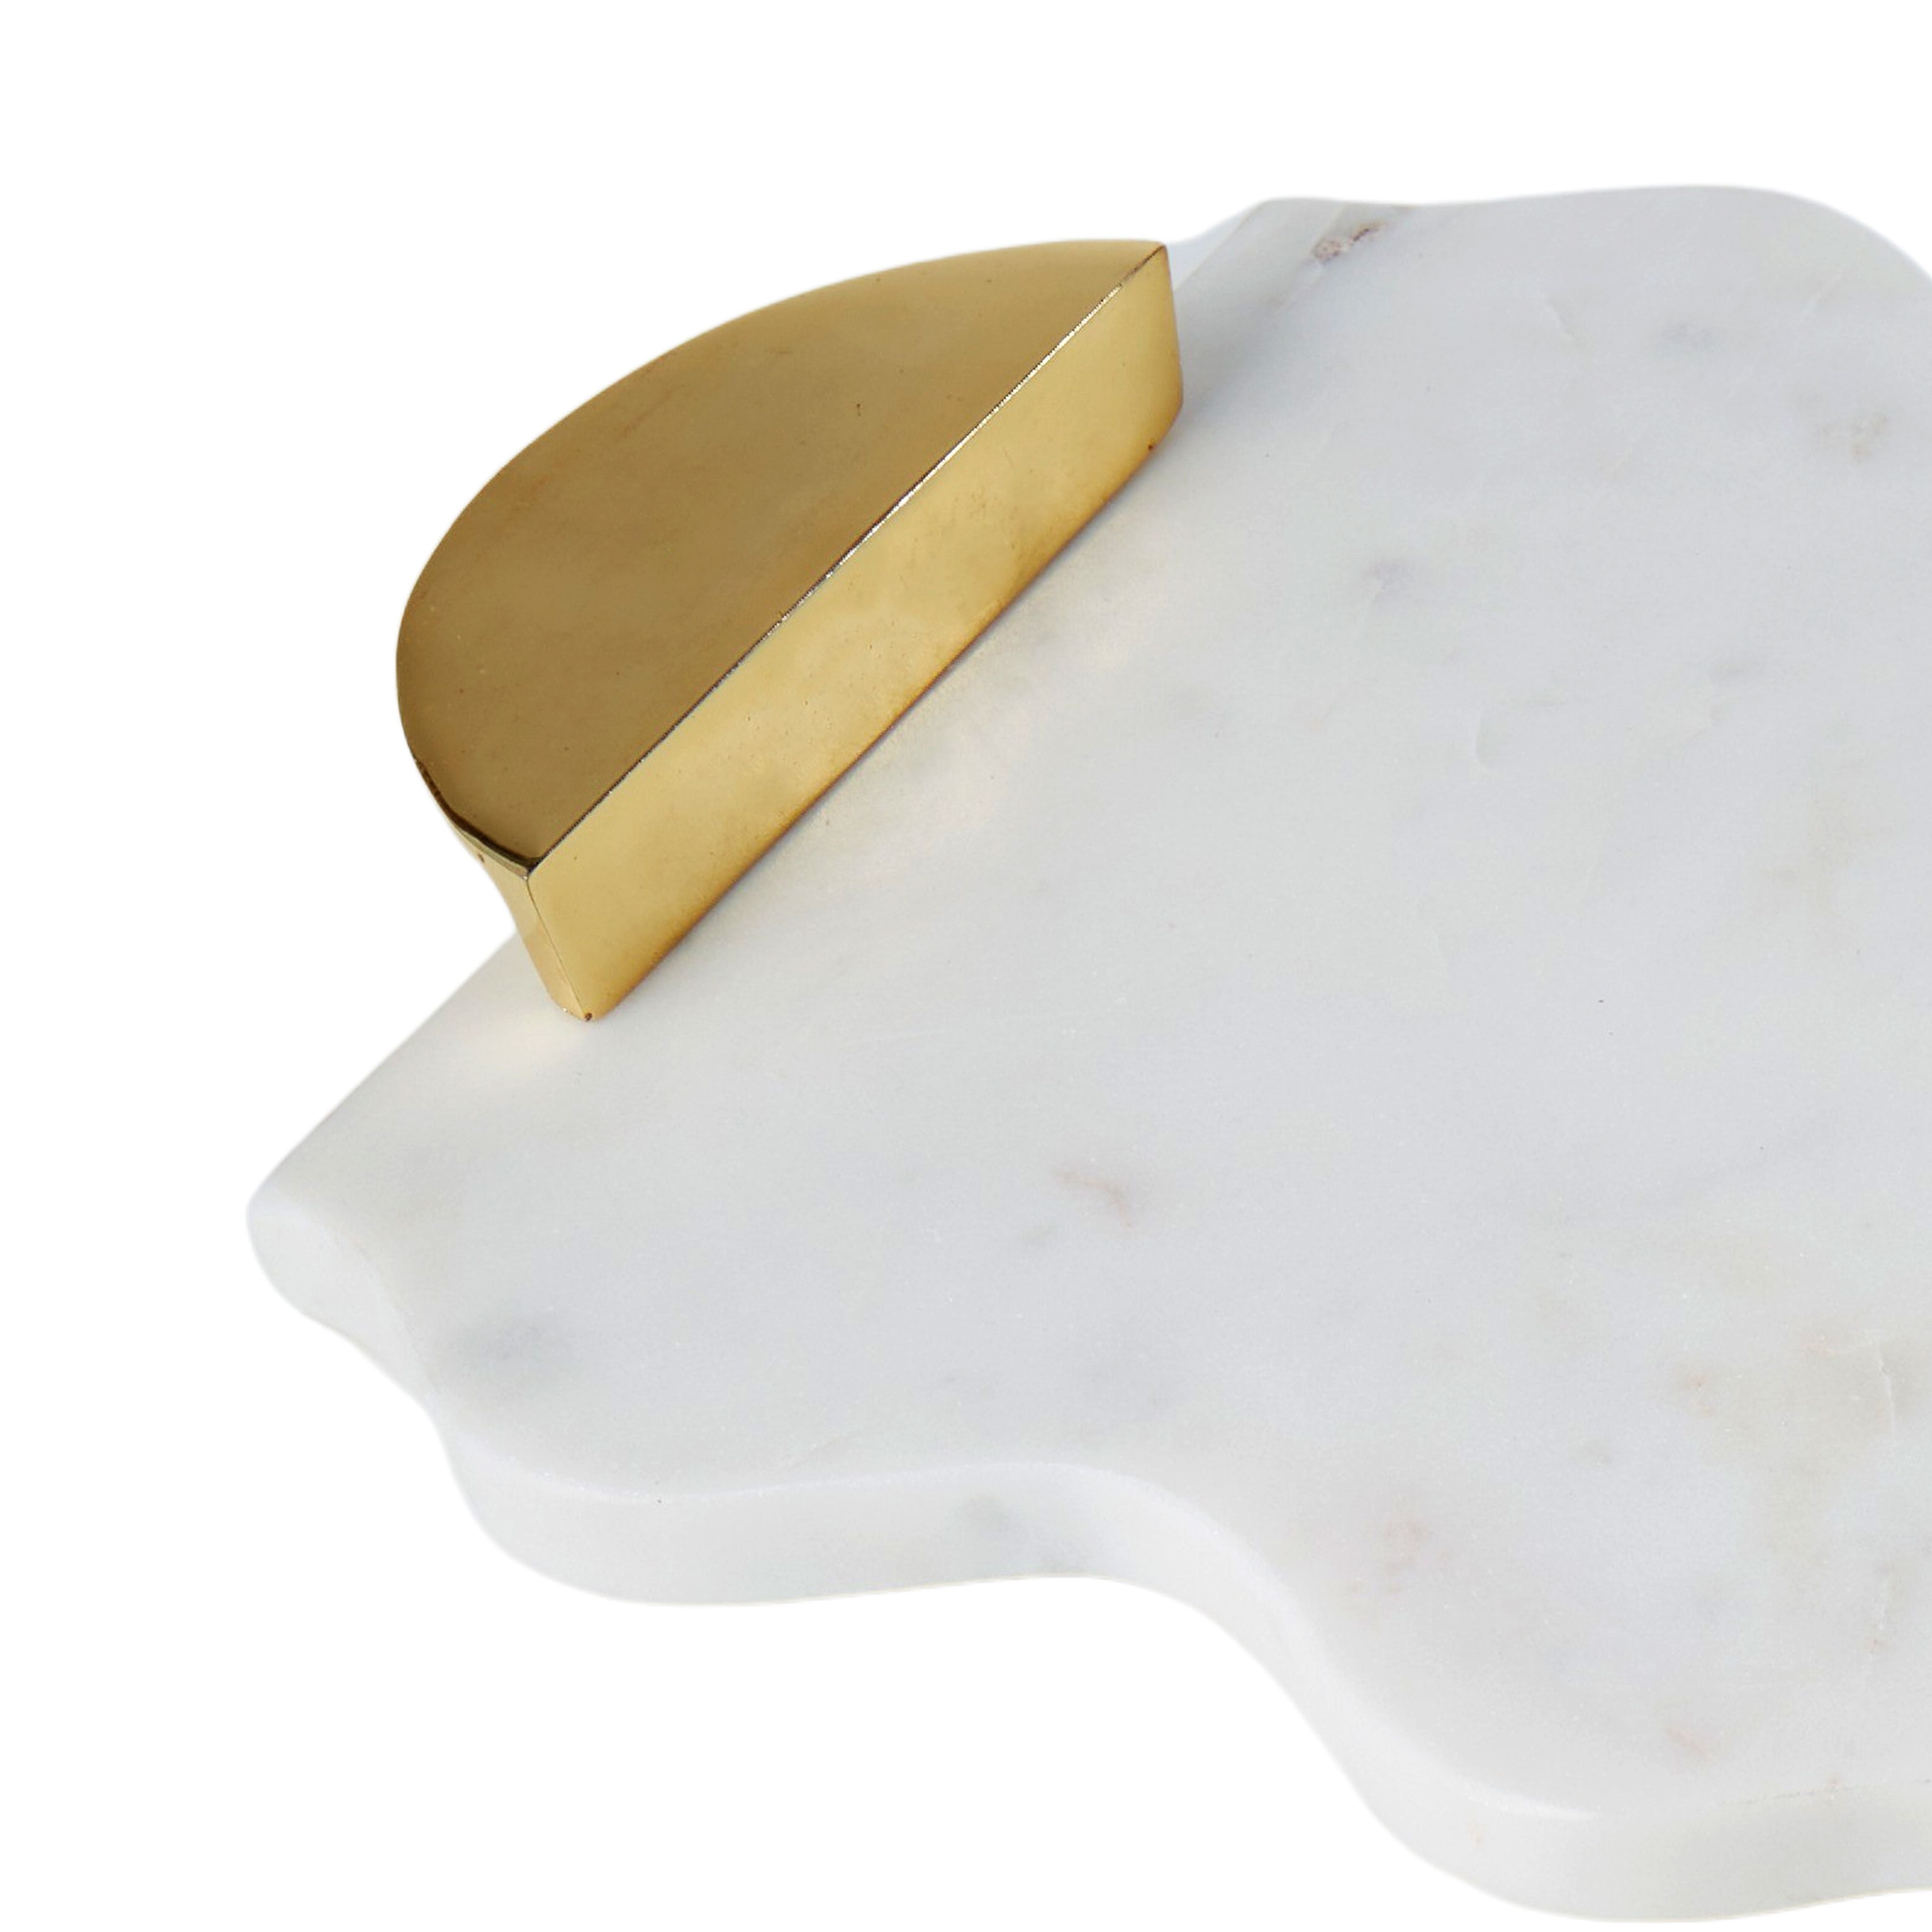 Marble Scalloped Serving Board - White/Gold-Decor Items-Amalfi-The Bay Room